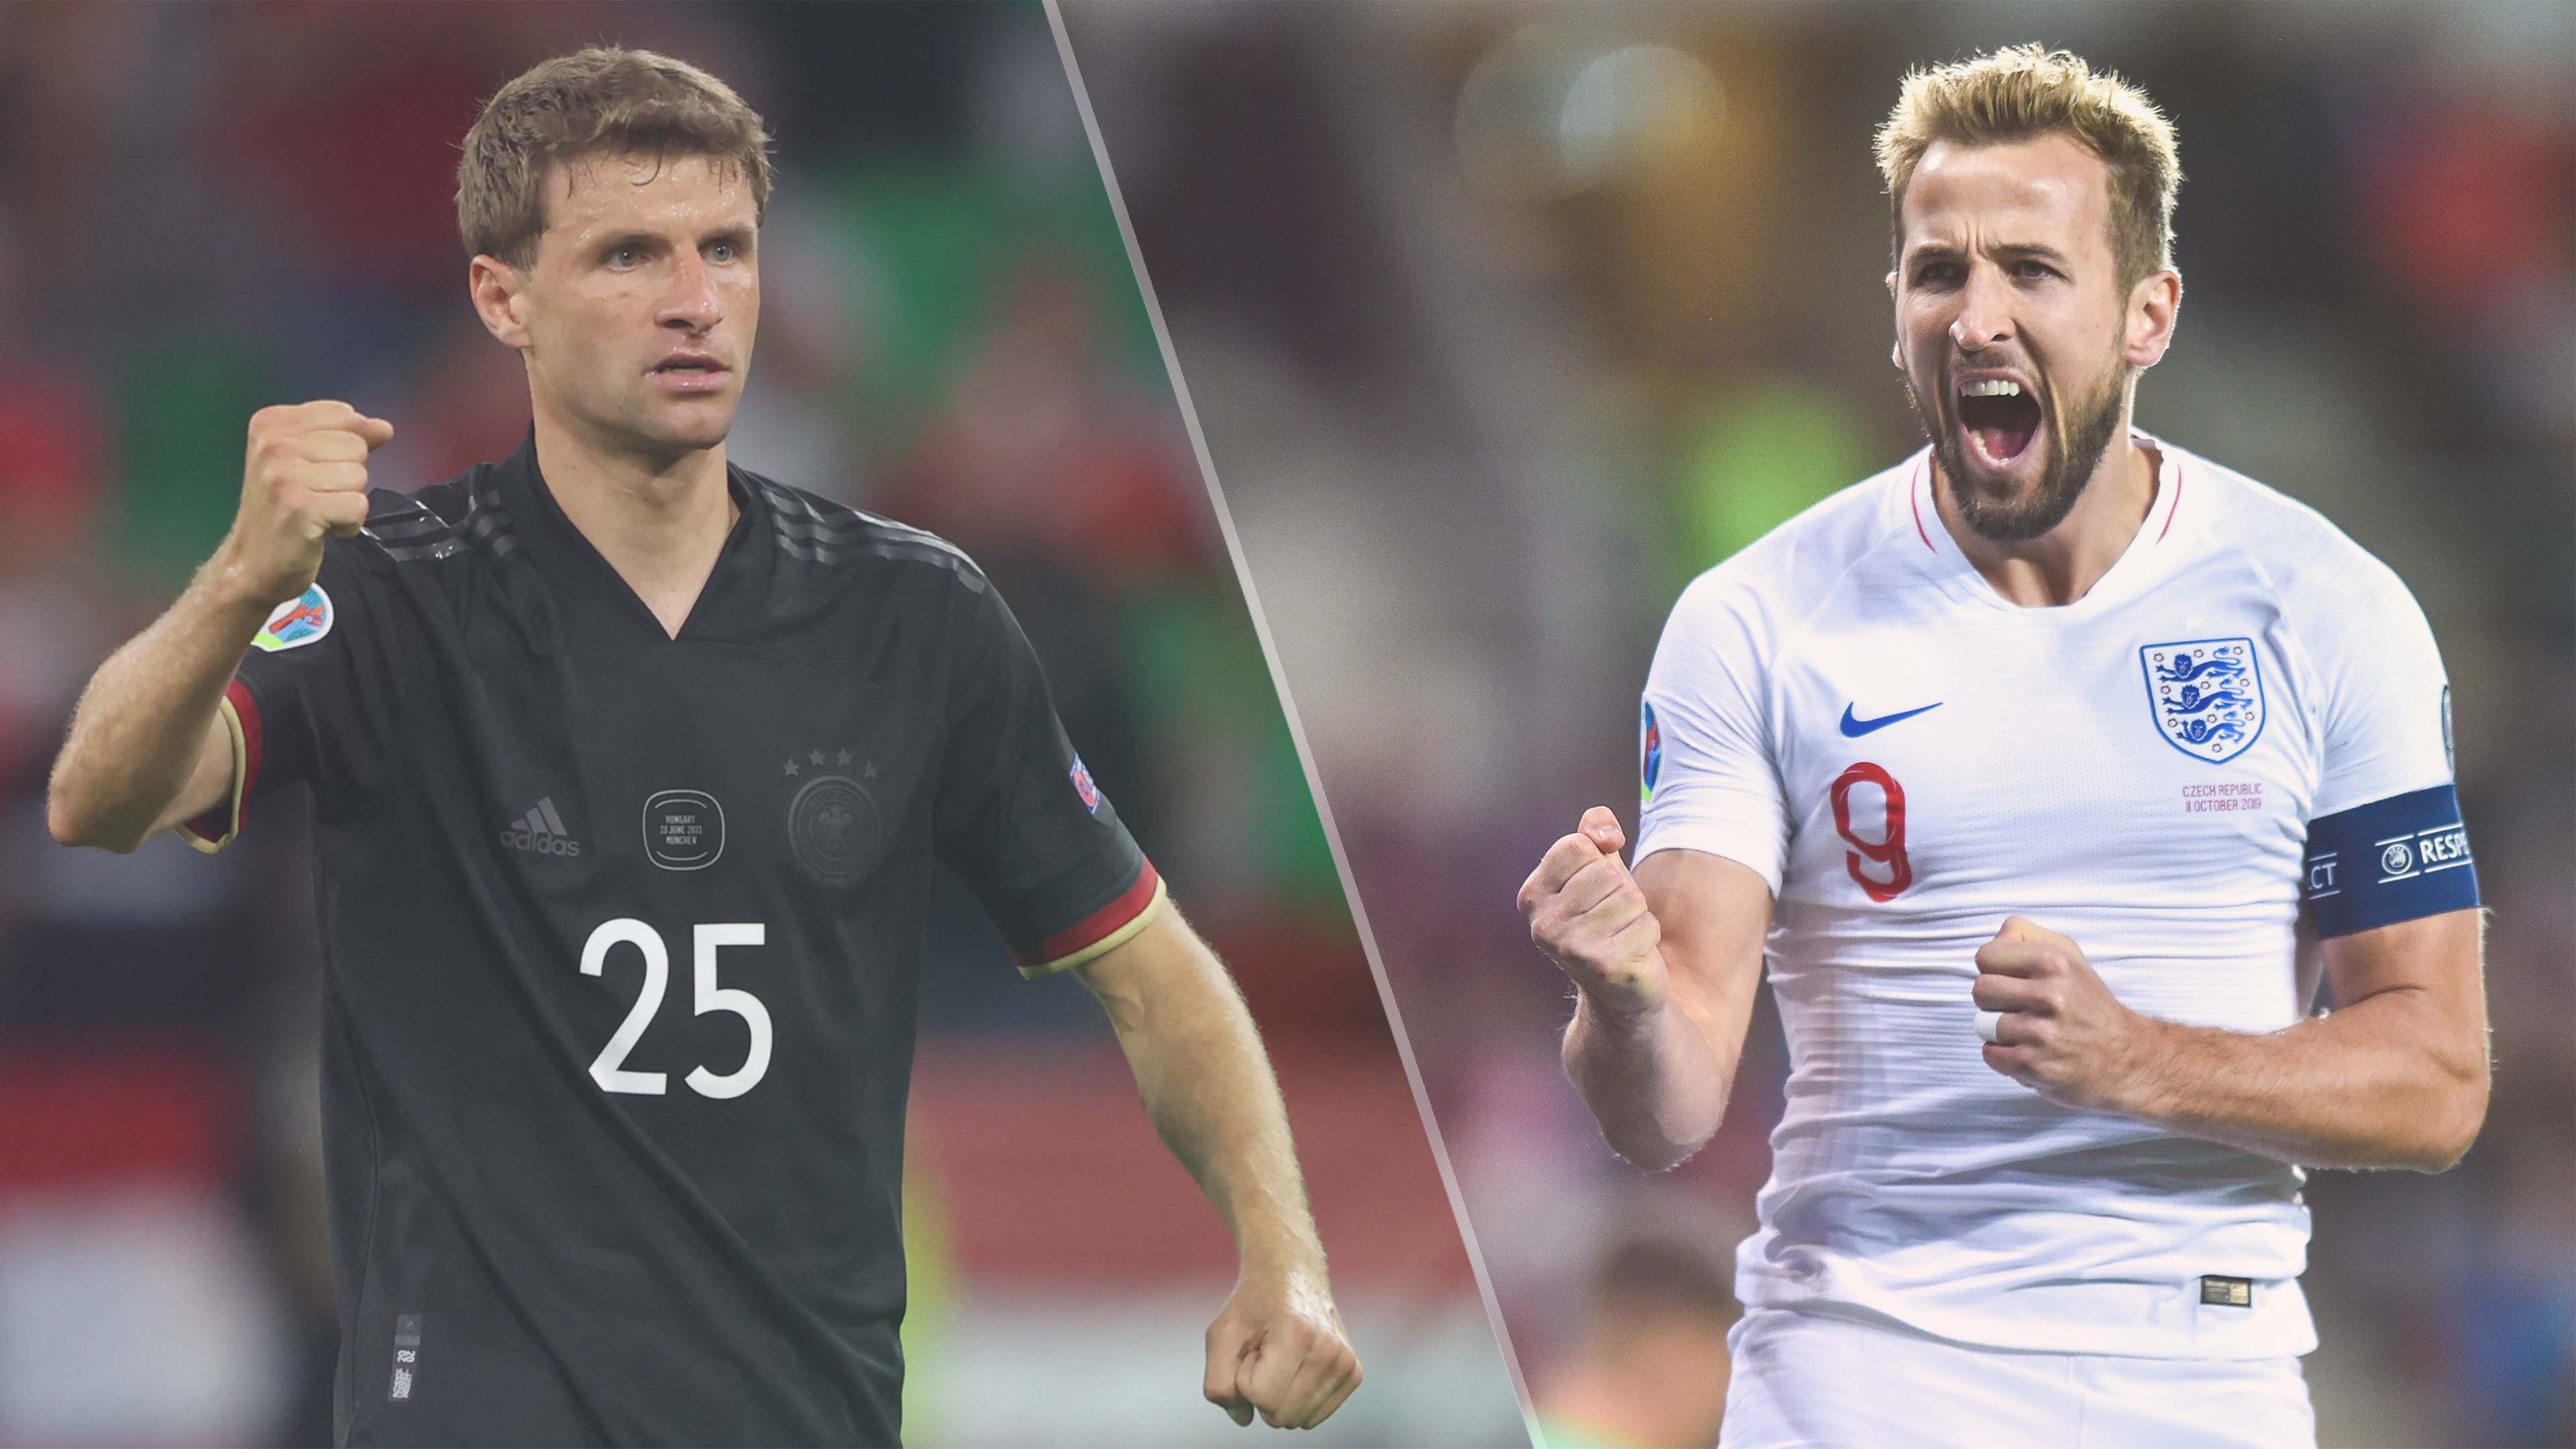 England vs Germany live stream — how to watch Euro 2020 game for free |  Tom's Guide